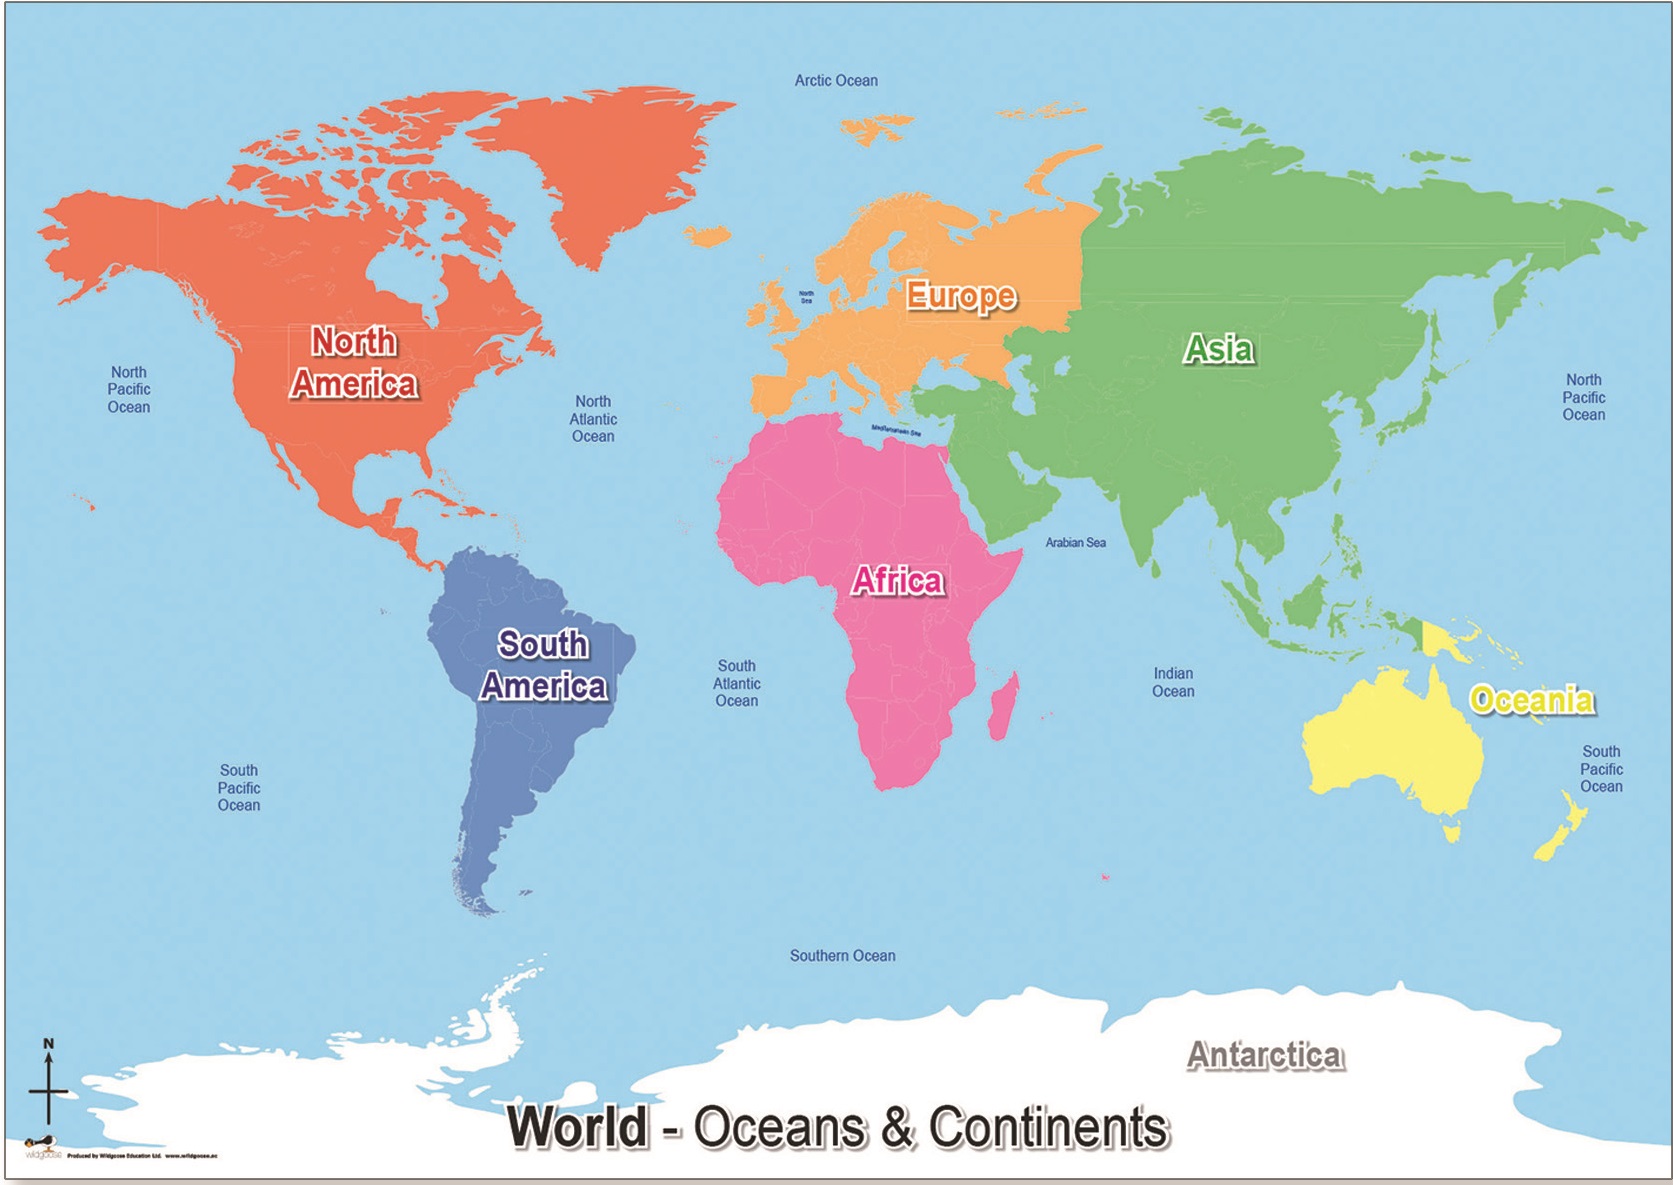 how many oceans are there